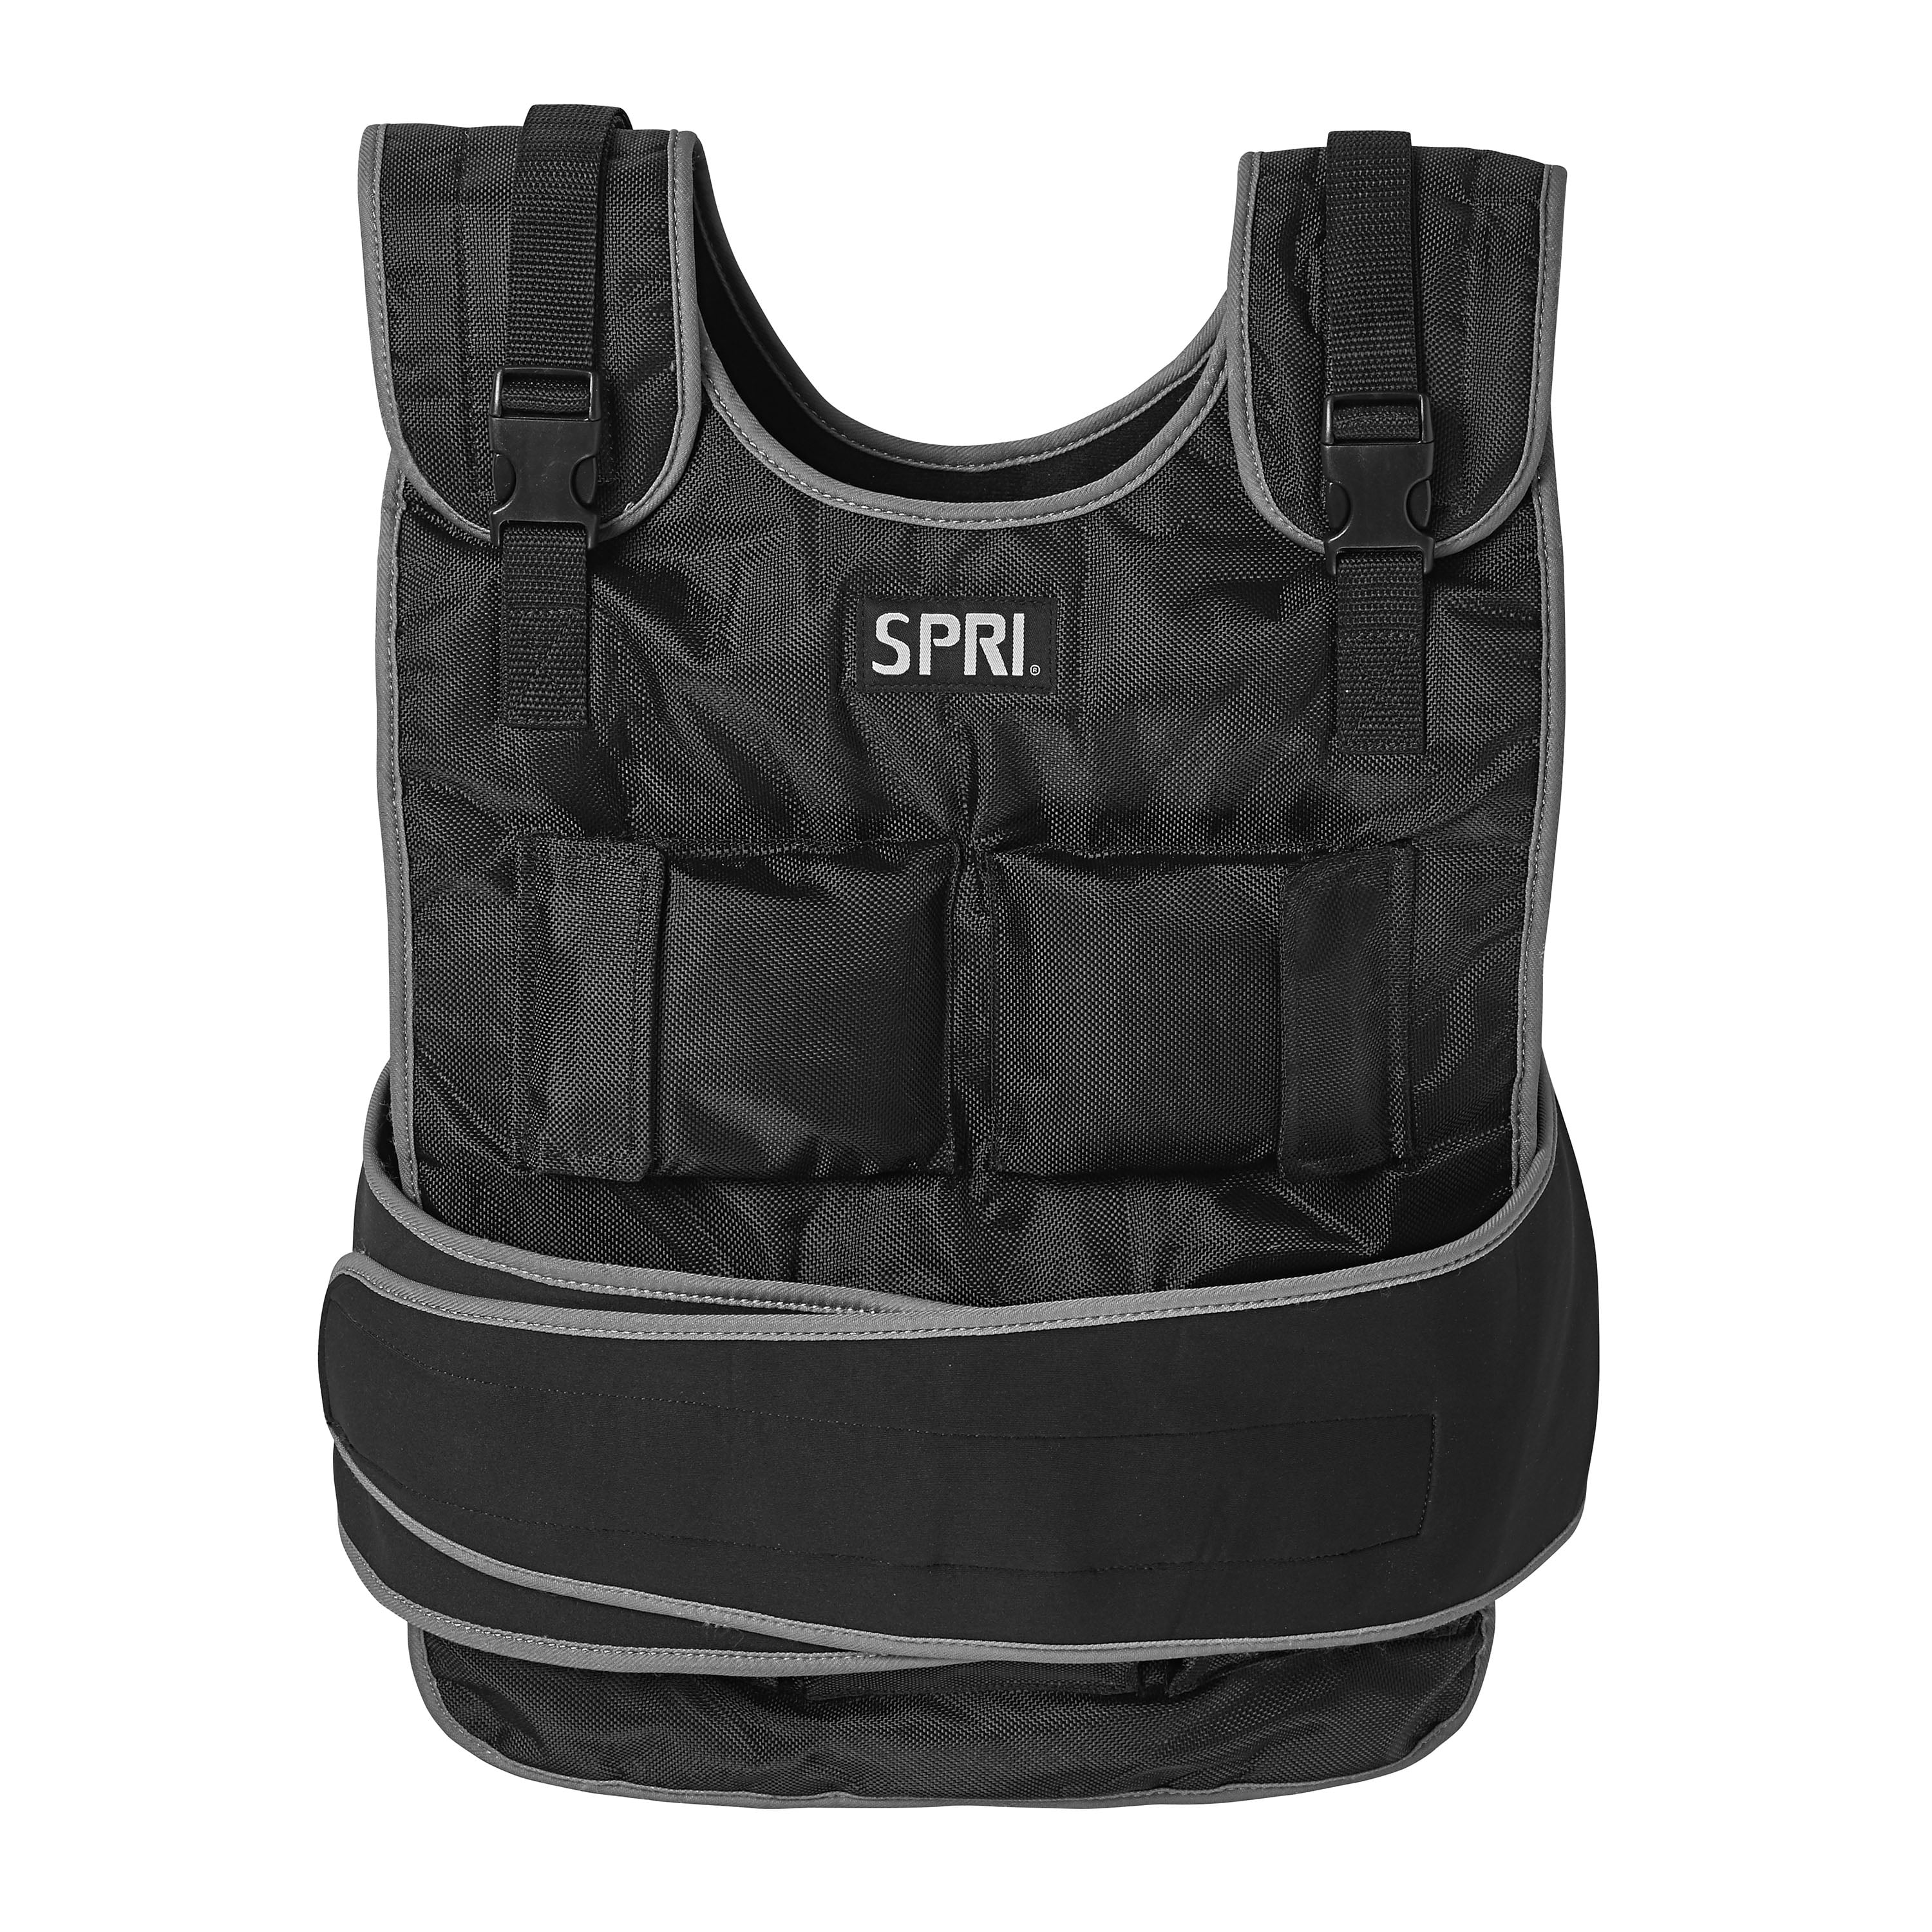 SPRI 20lb Weighted Vest Adjustable Weight Sweat Resistant W/ Guide 